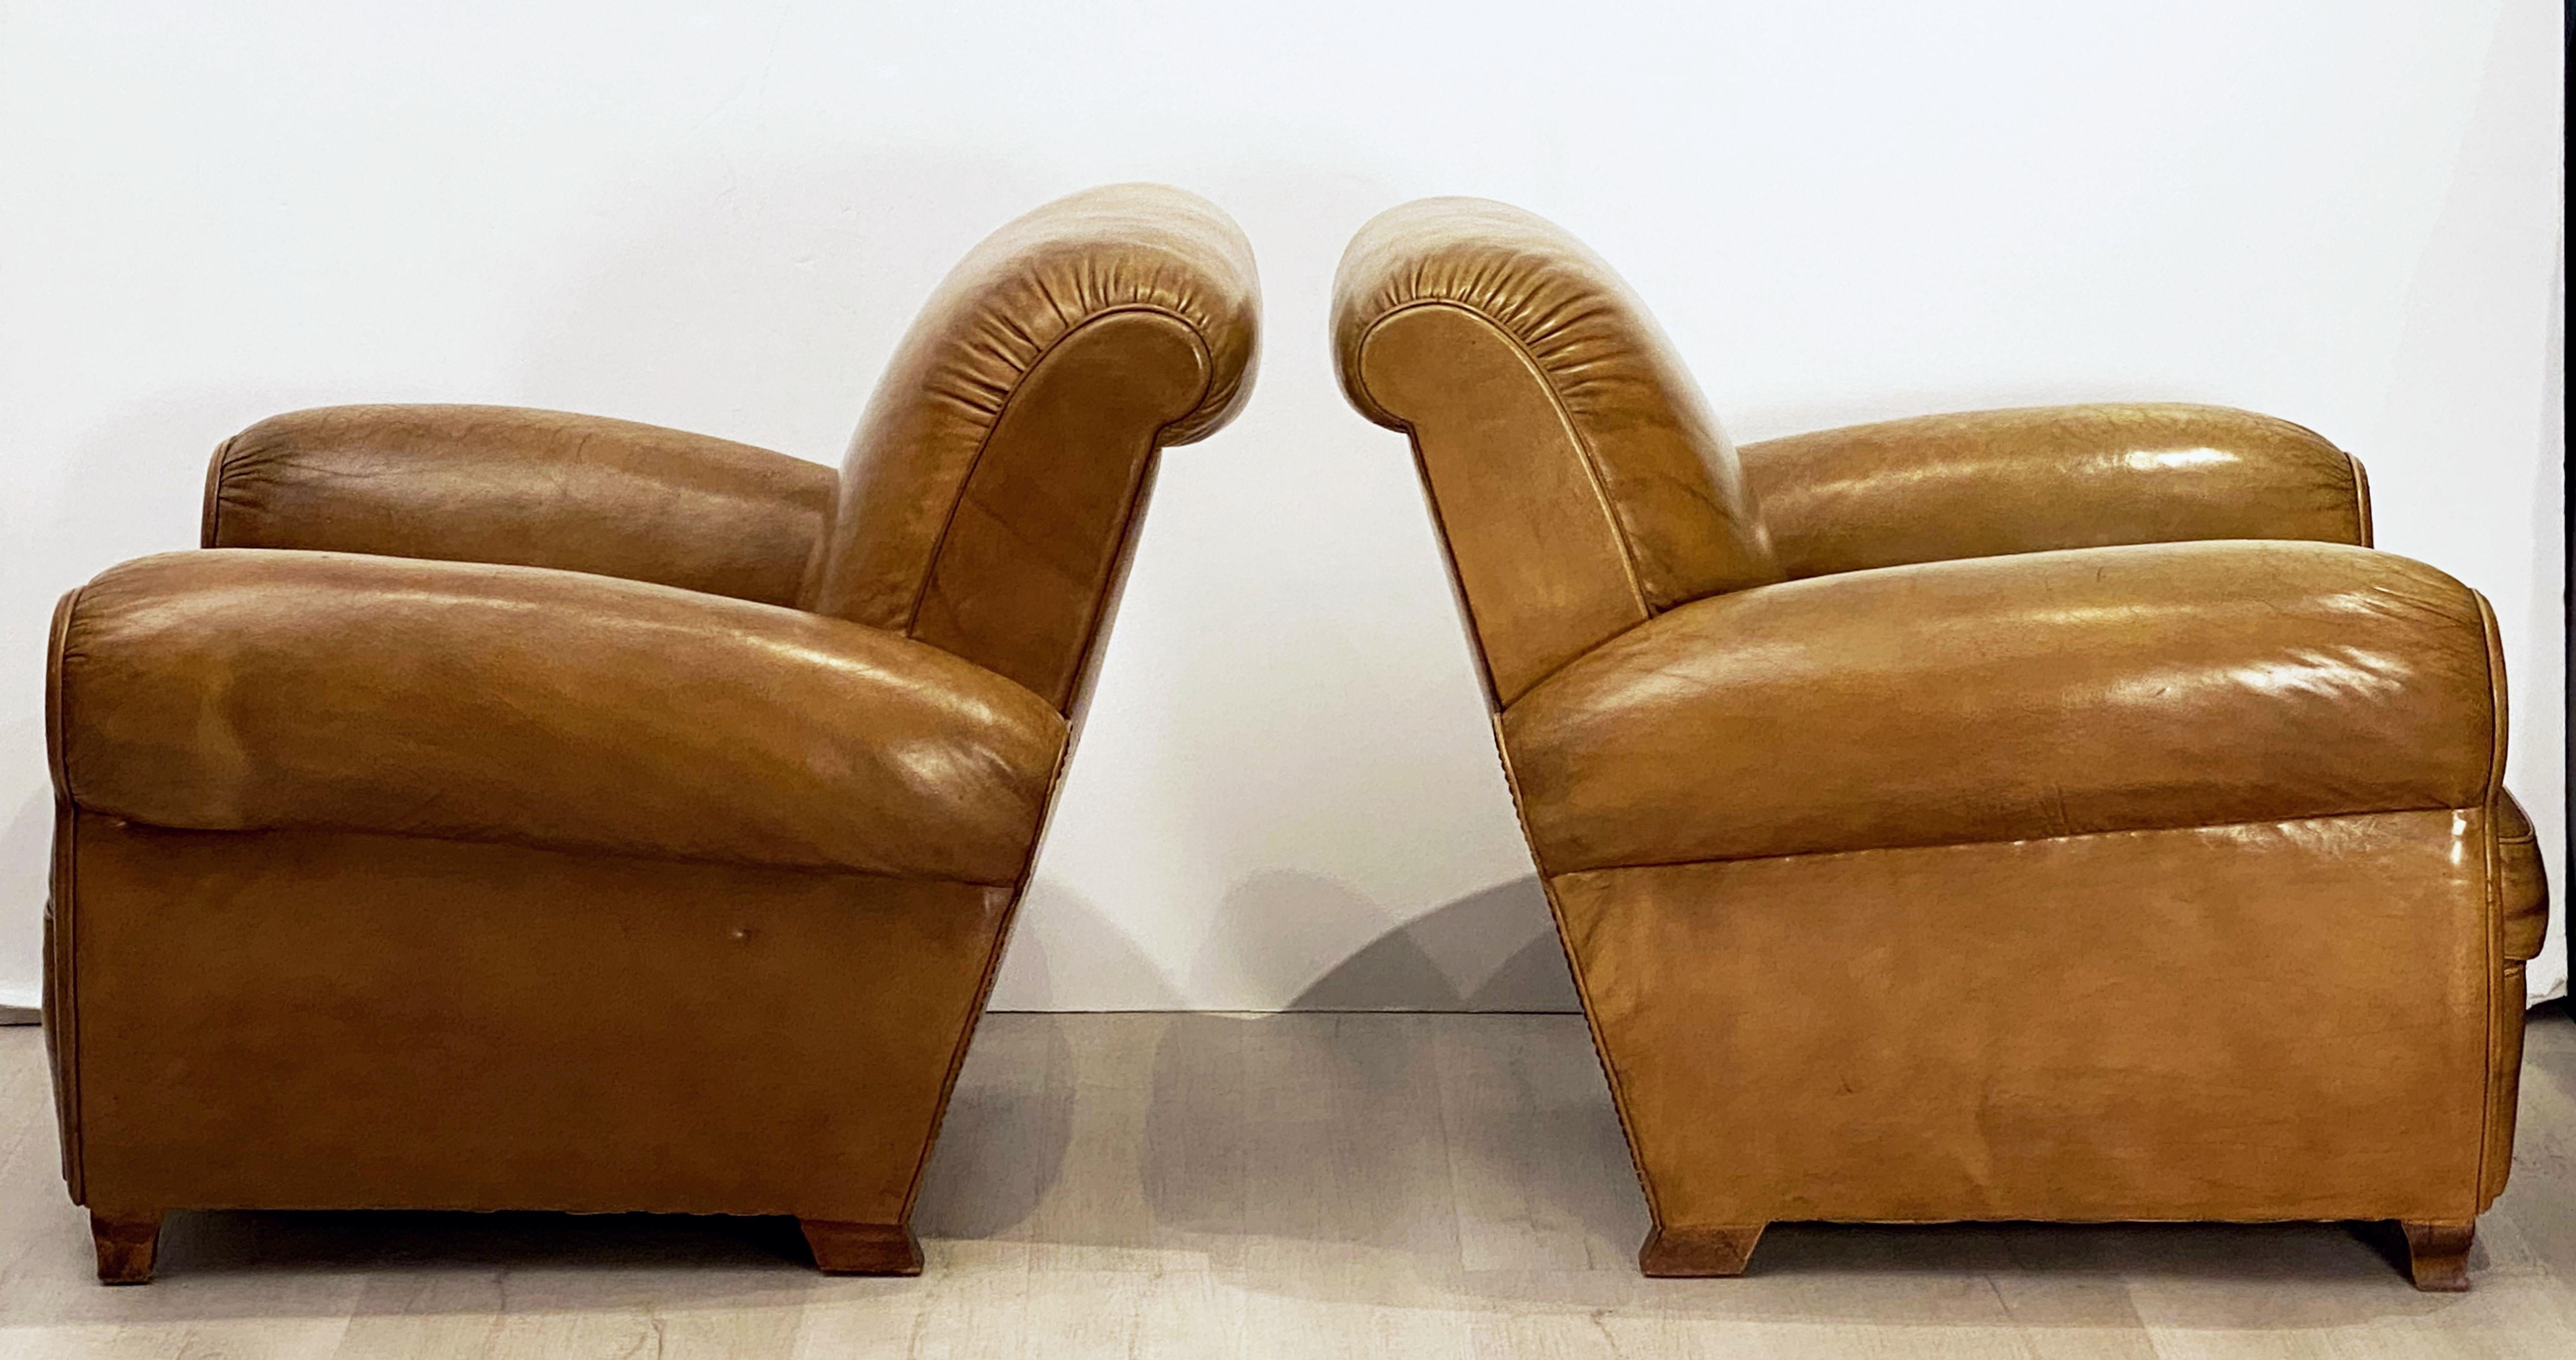 A handsome pair of vintage French leather upholstered club or lounge chairs from the Art Deco era - each chair featuring a comfortable back and seat with removable cushion, with stylish arms and original leather, brass nail-head trim to back, and